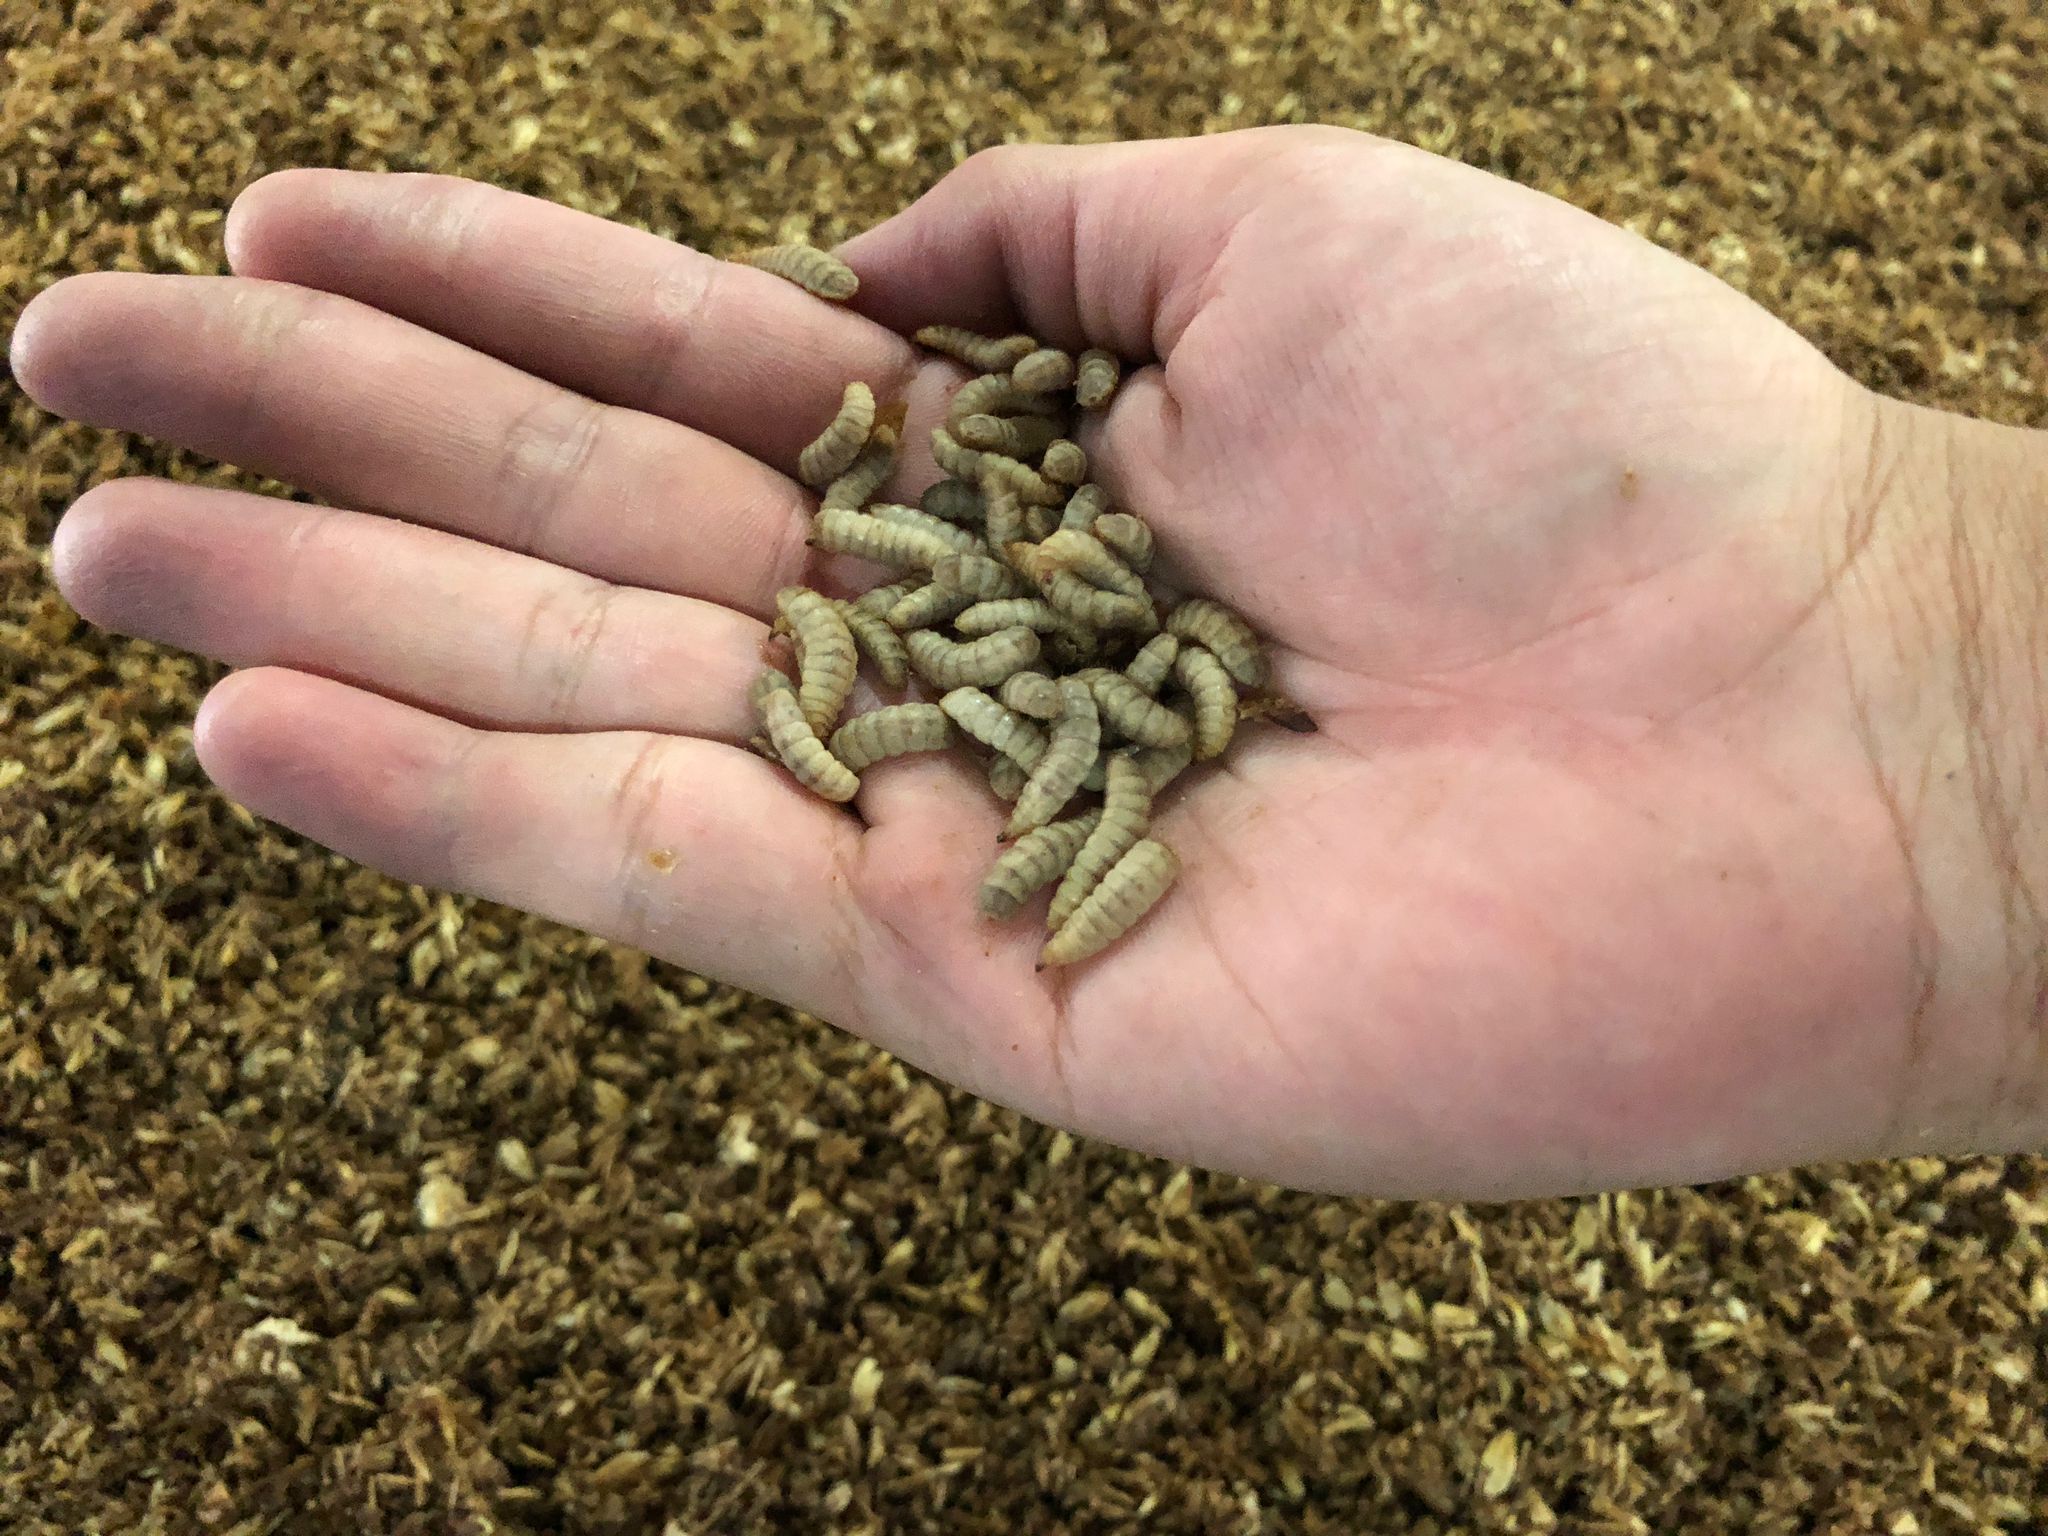 Insect Feed Technologies turns food waste and larvae into clean, high-quality protein for pets and animals